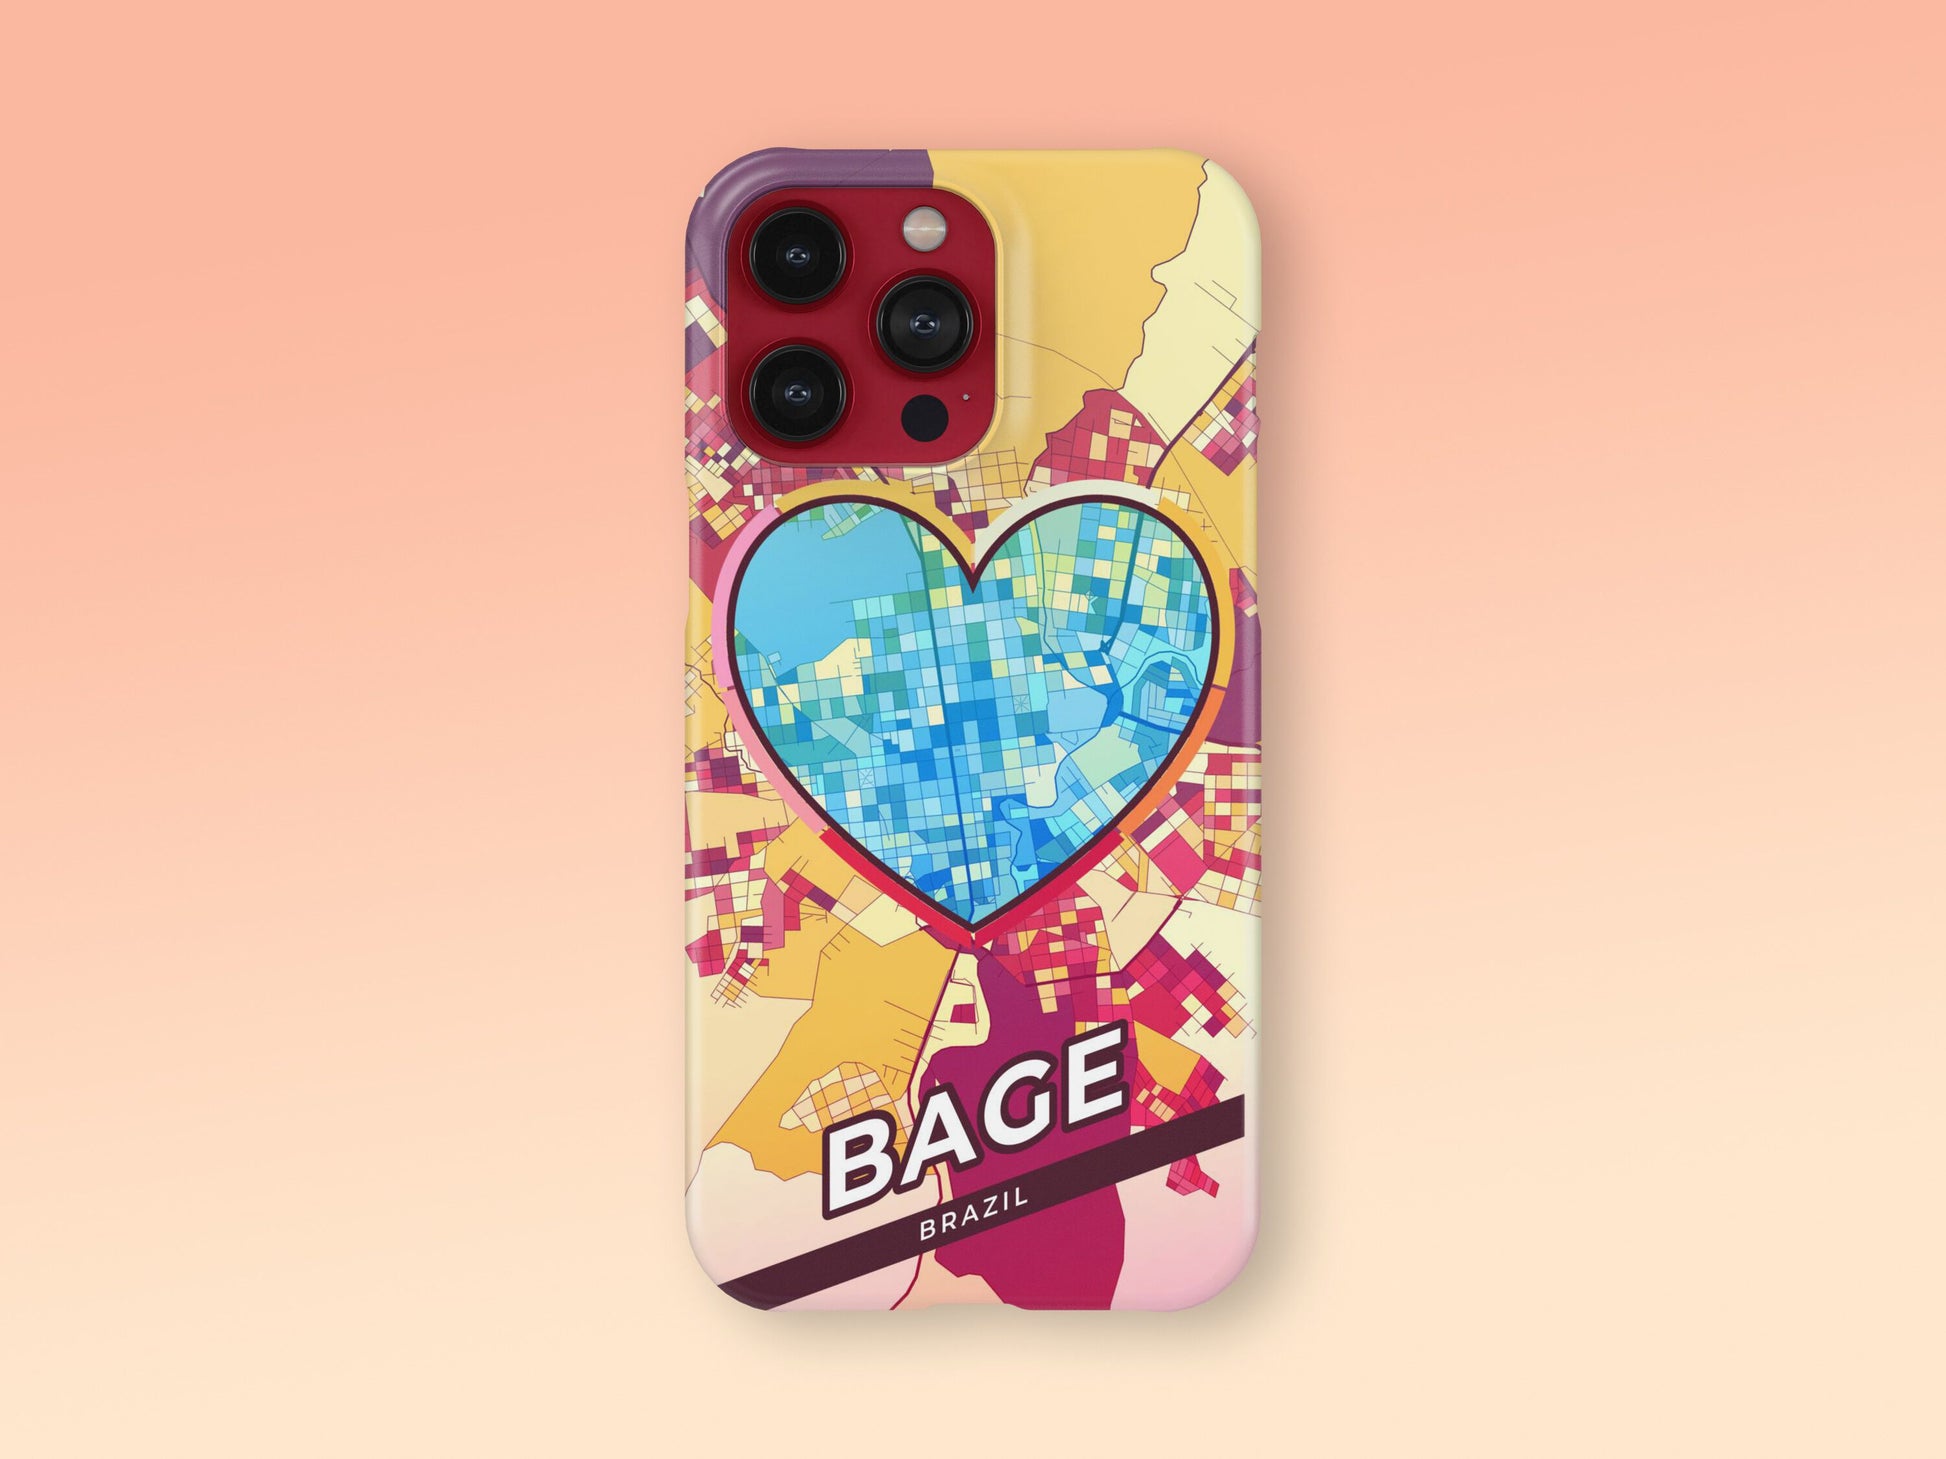 Bage Brazil slim phone case with colorful icon. Birthday, wedding or housewarming gift. Couple match cases. 2